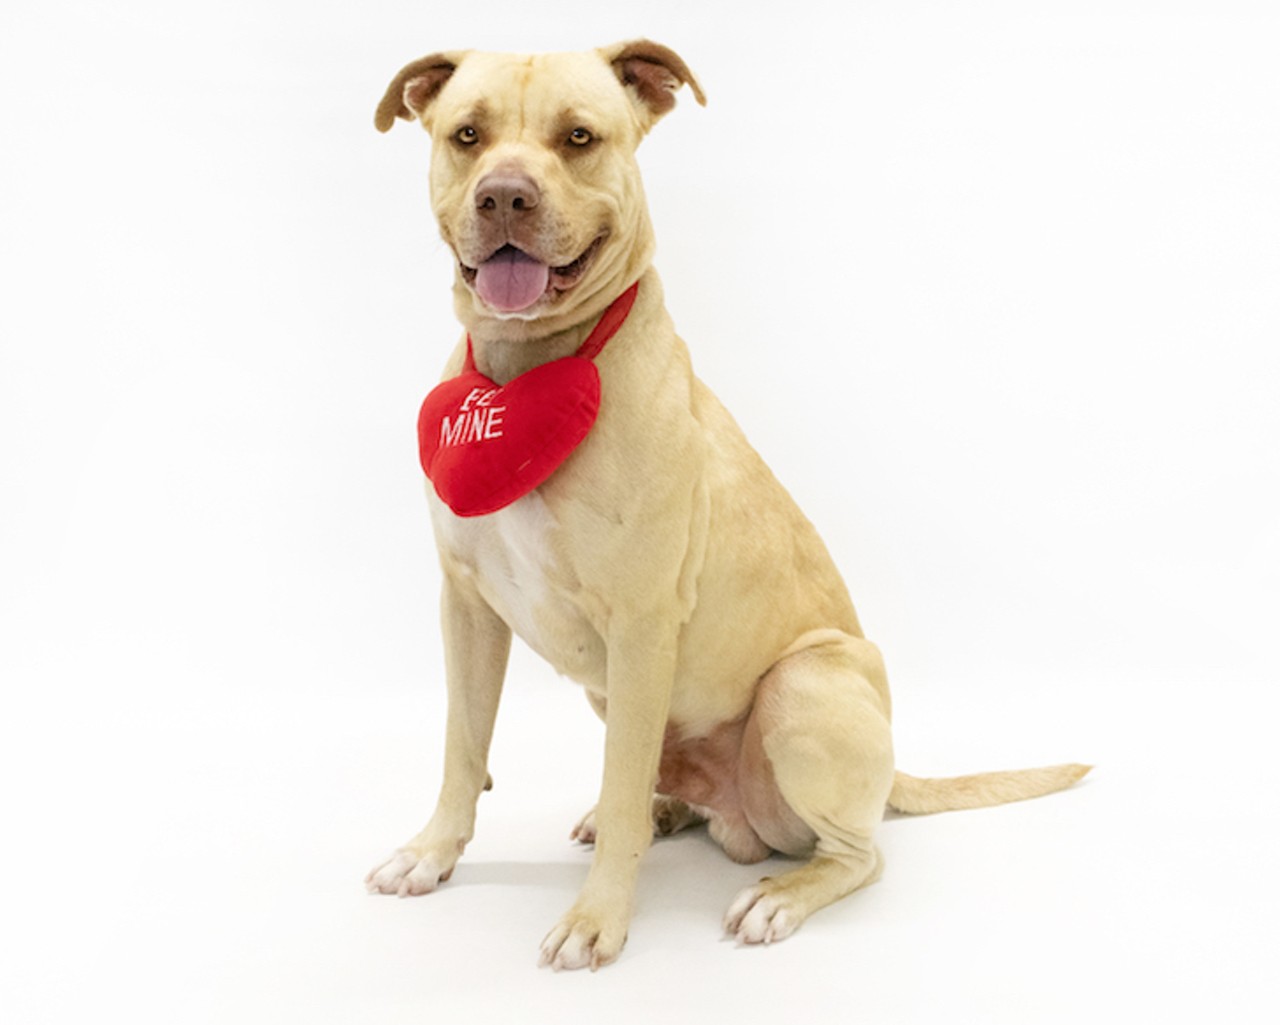 20 adoptable Orlando County dogs looking for a new sweetheart